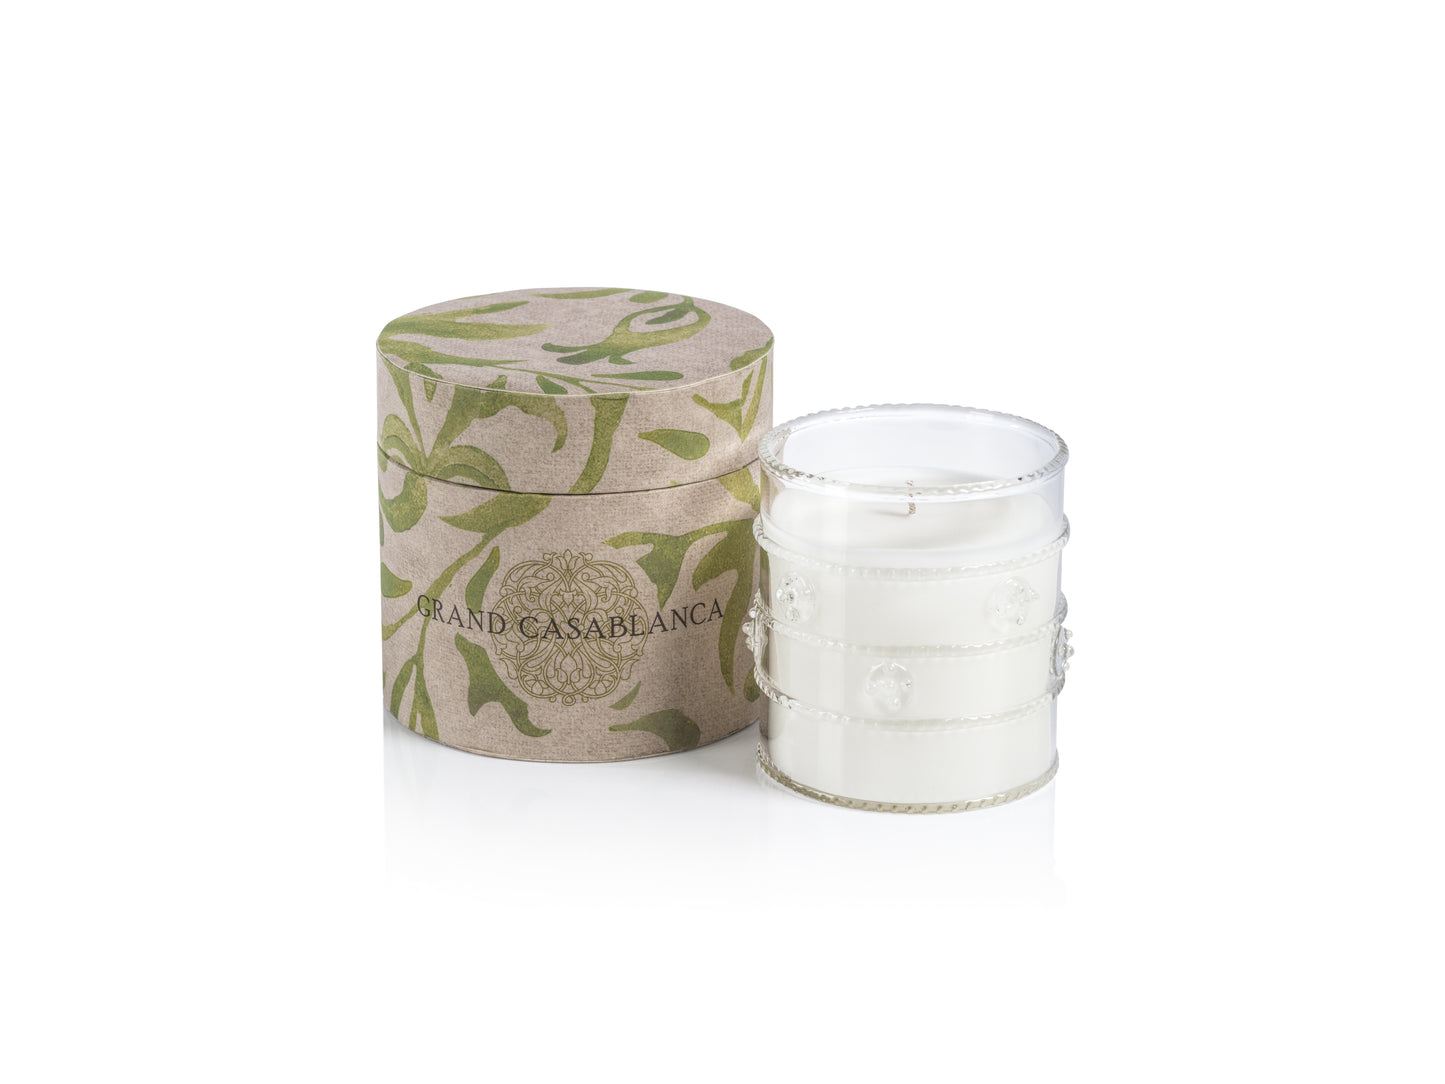 LILY of the VALLEY Zodax Grand Casablanca Scented Candle 6.5 oz - Gift Boxed